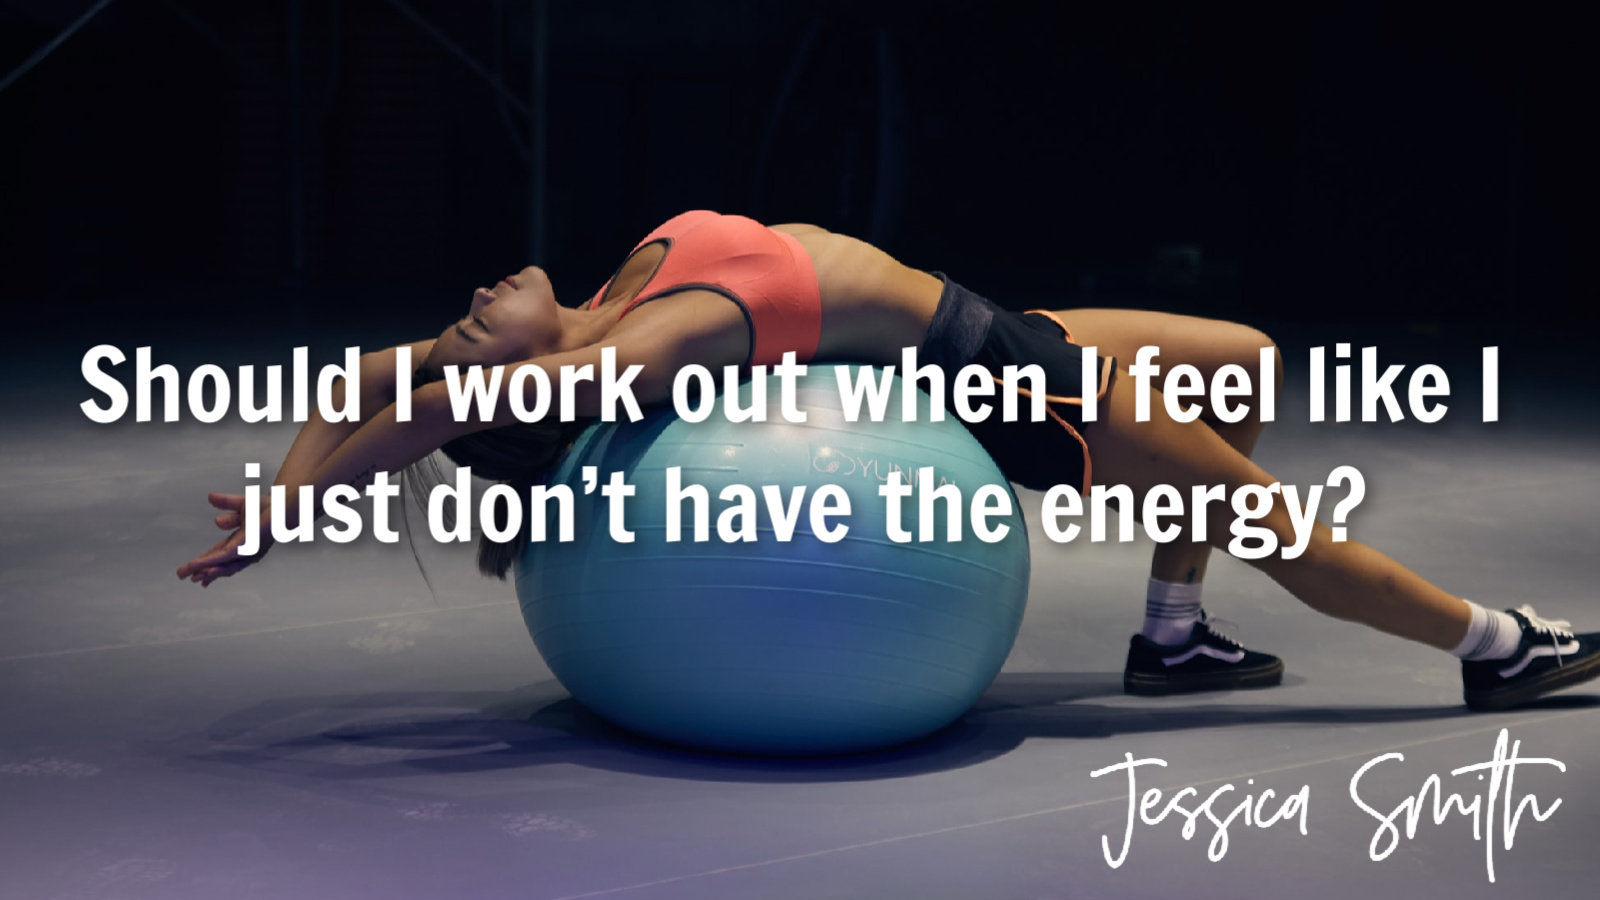 Should I work out when I feel like I just don’t have the energy by Jessica Smith